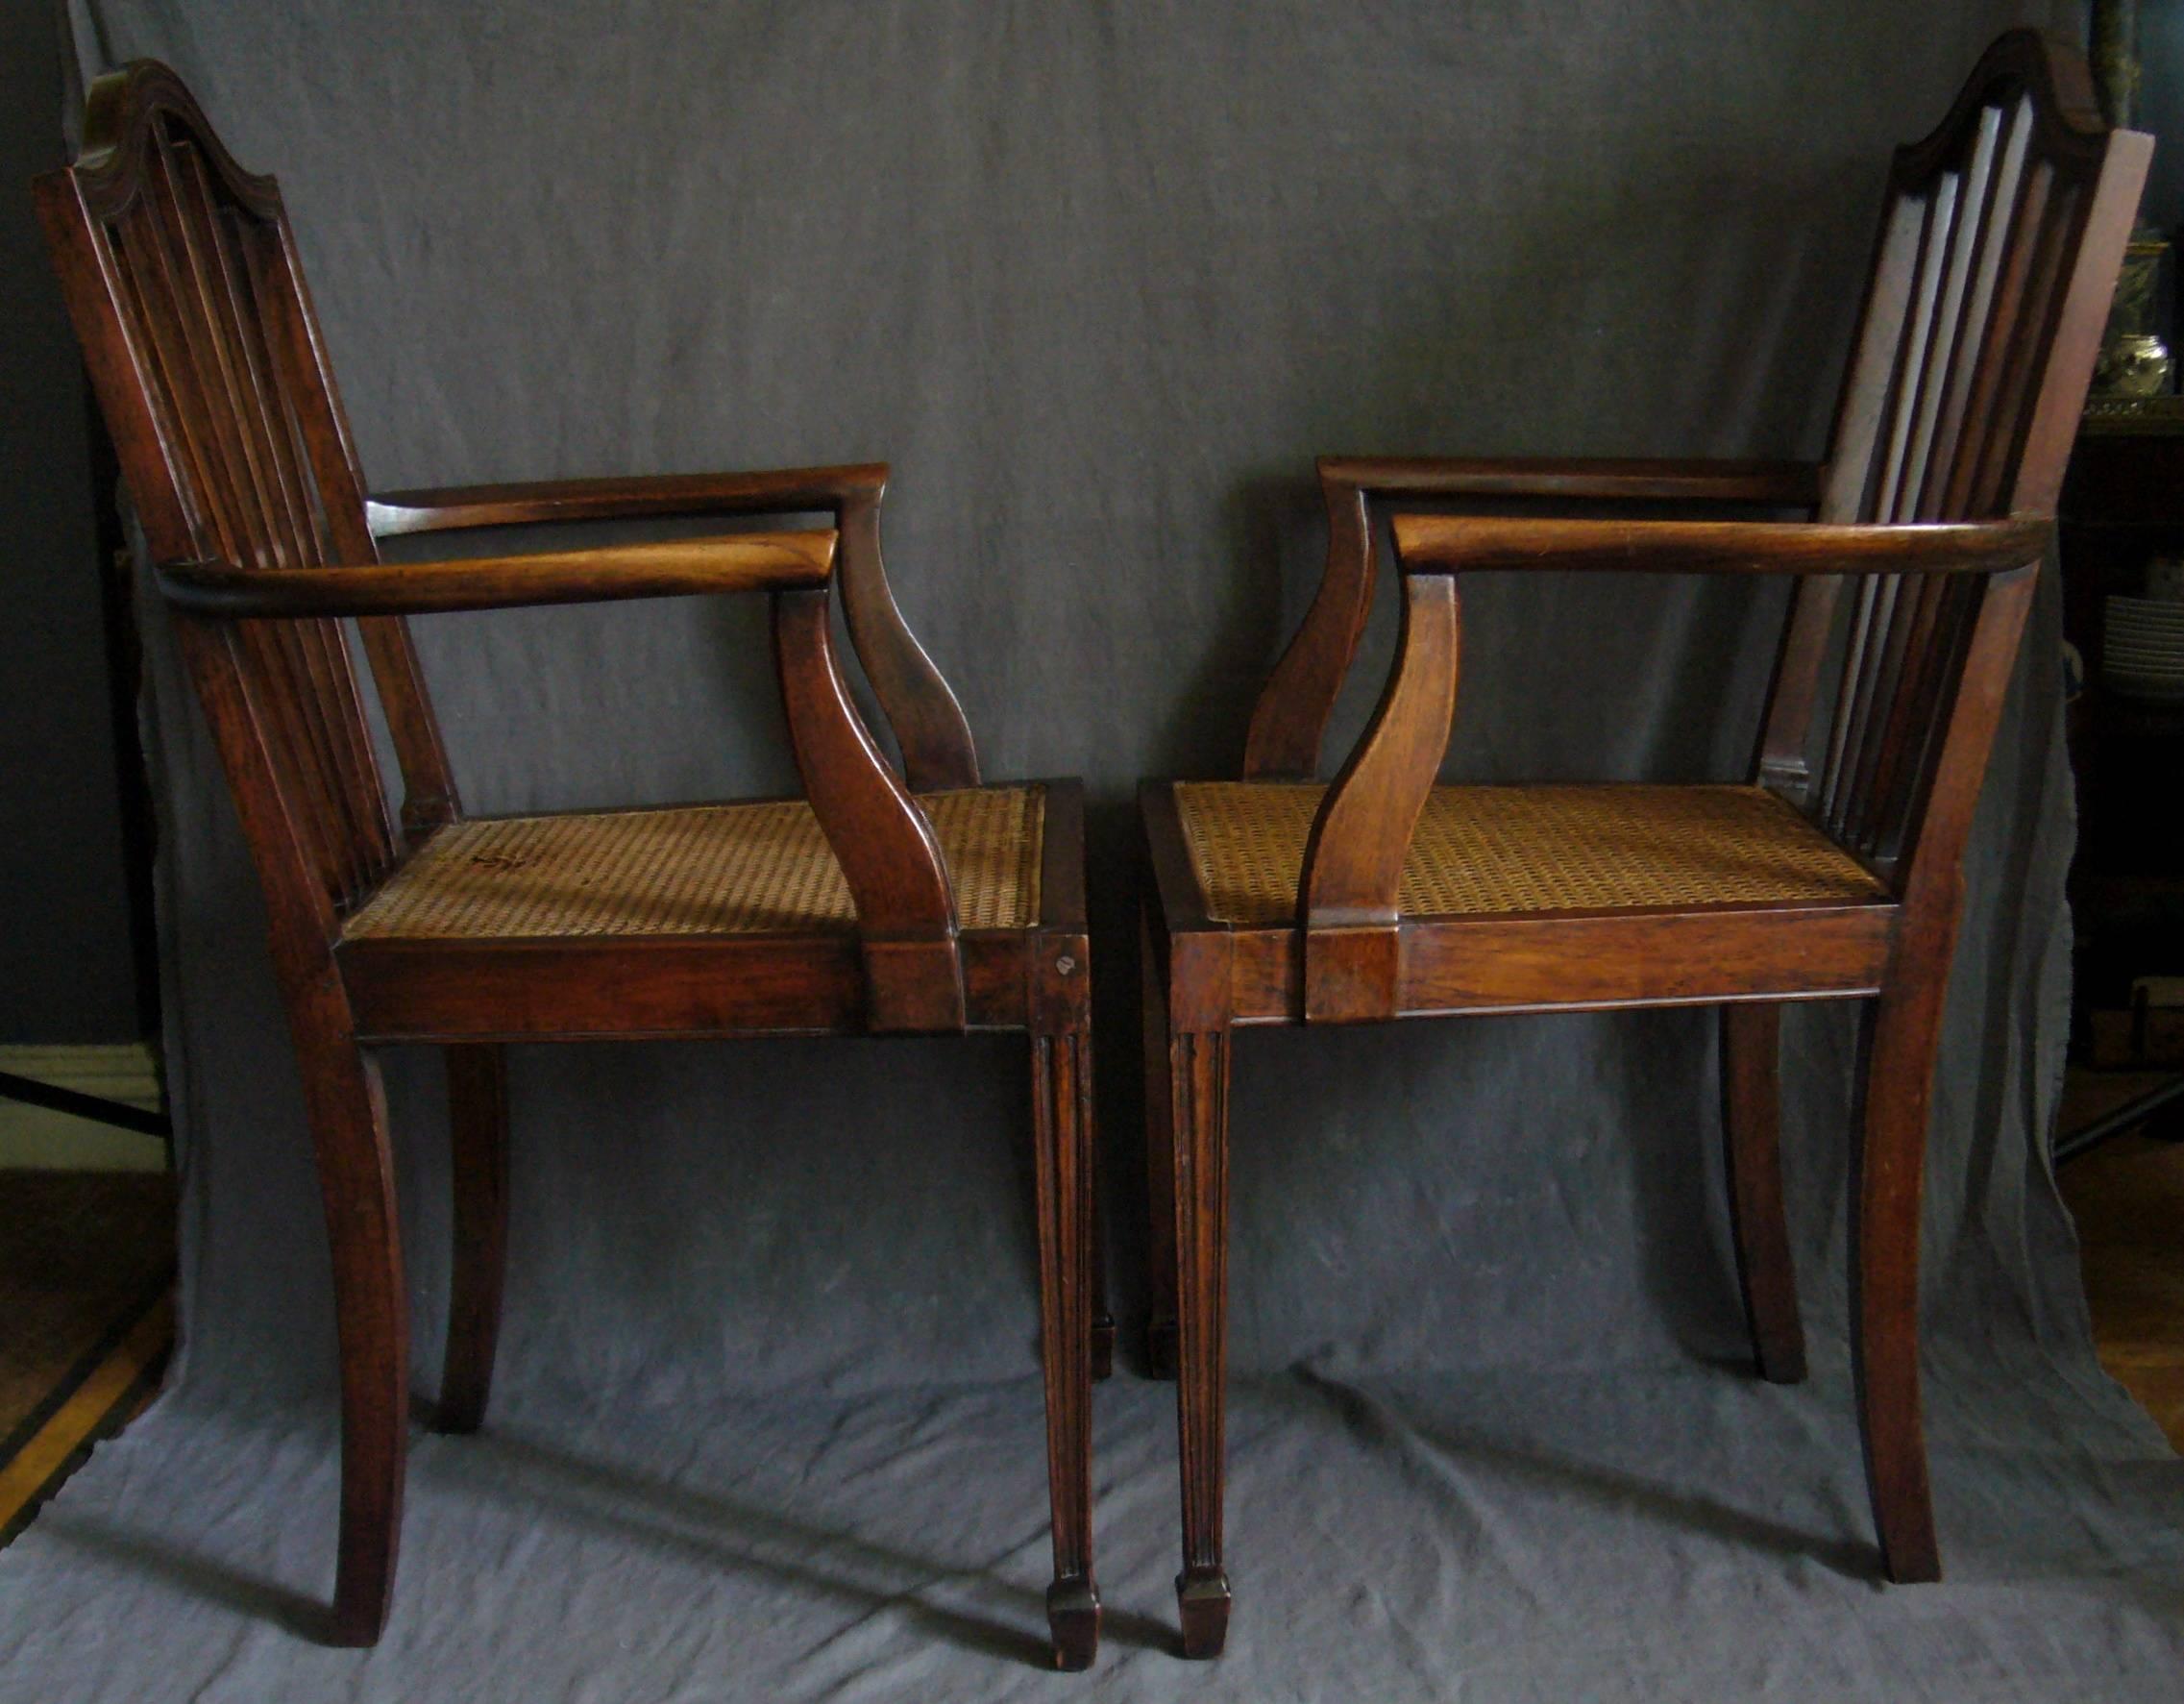 Pair of George III style mahogany armchairs. Serpentine crested mahogany slatted back armchairs with caned seat and fluted legs, England, circa 1930. 
Dimension: 21